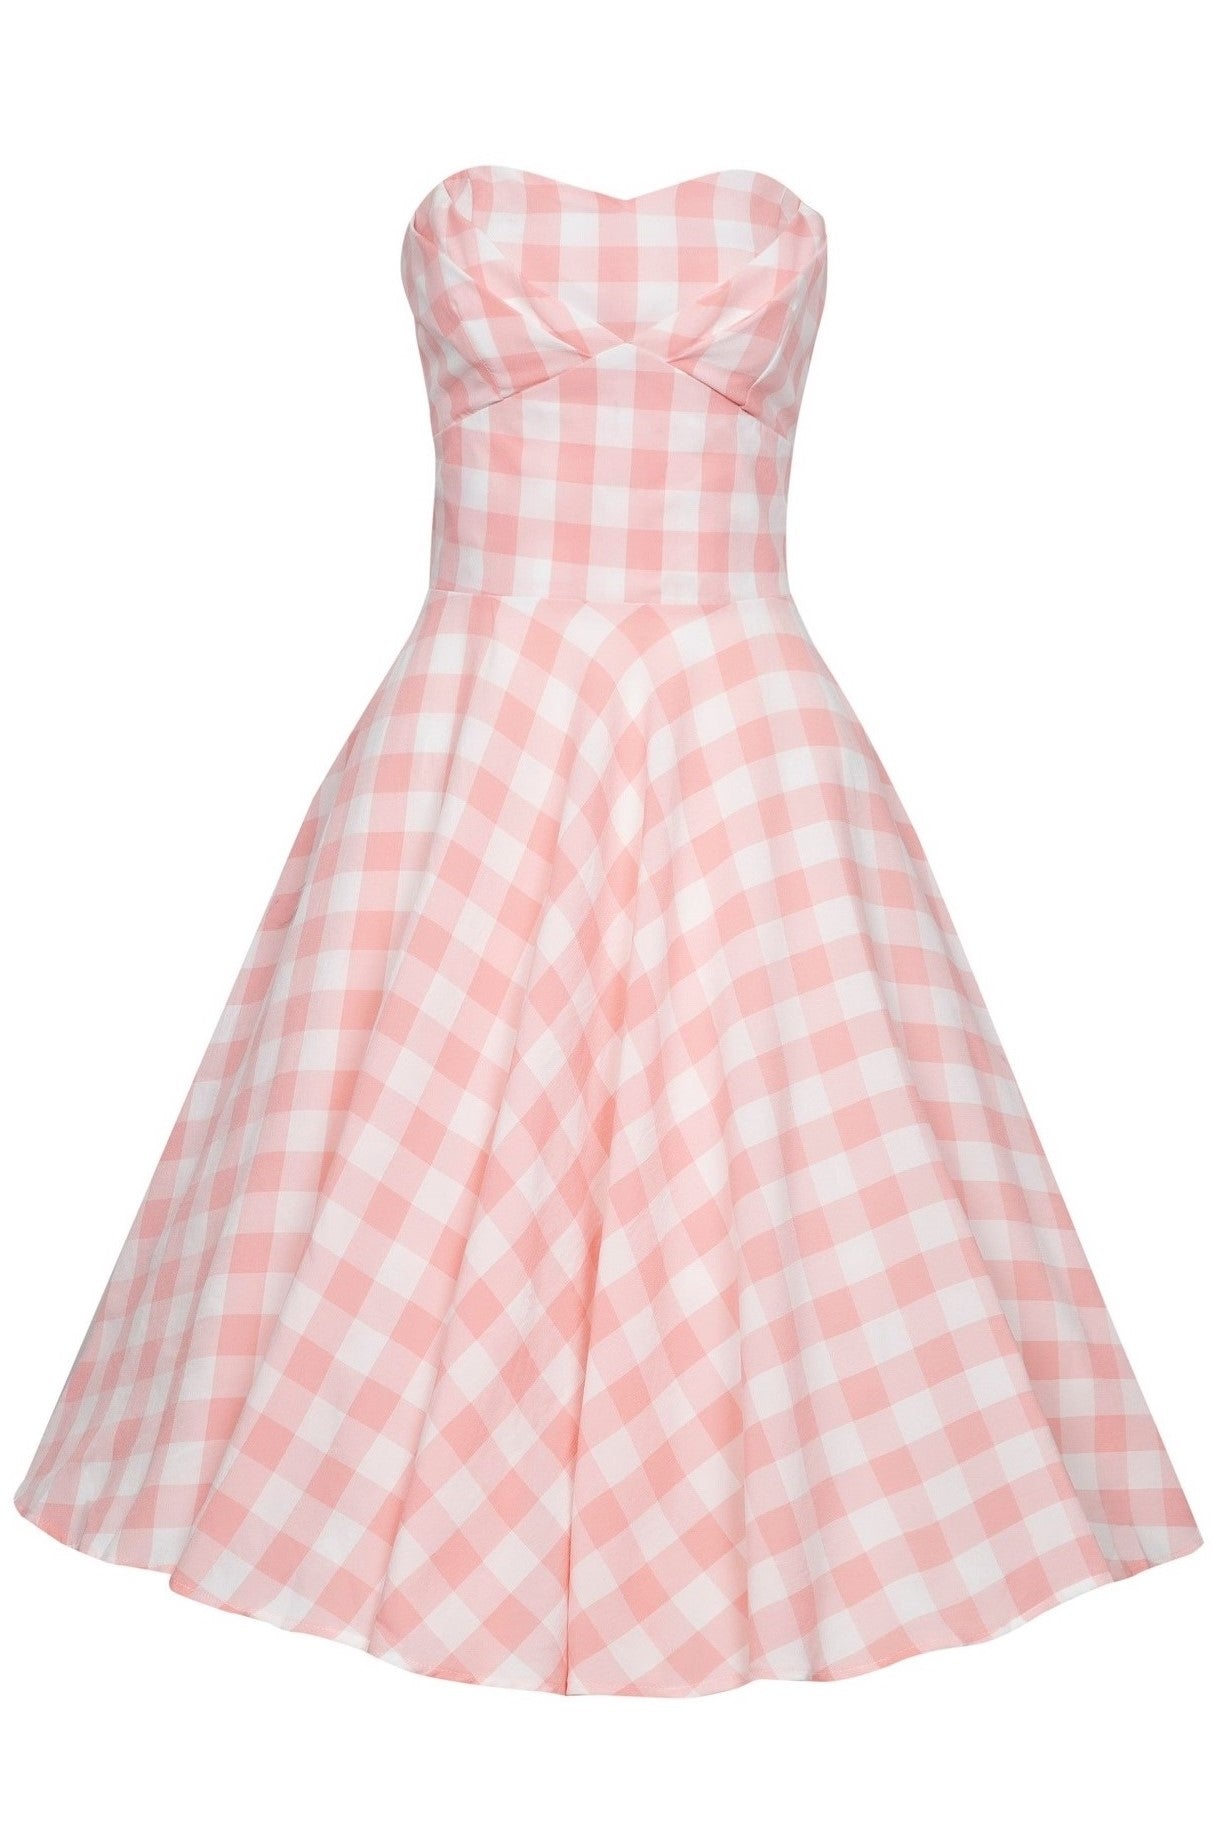 Strapless flared dress in pink gingham check print